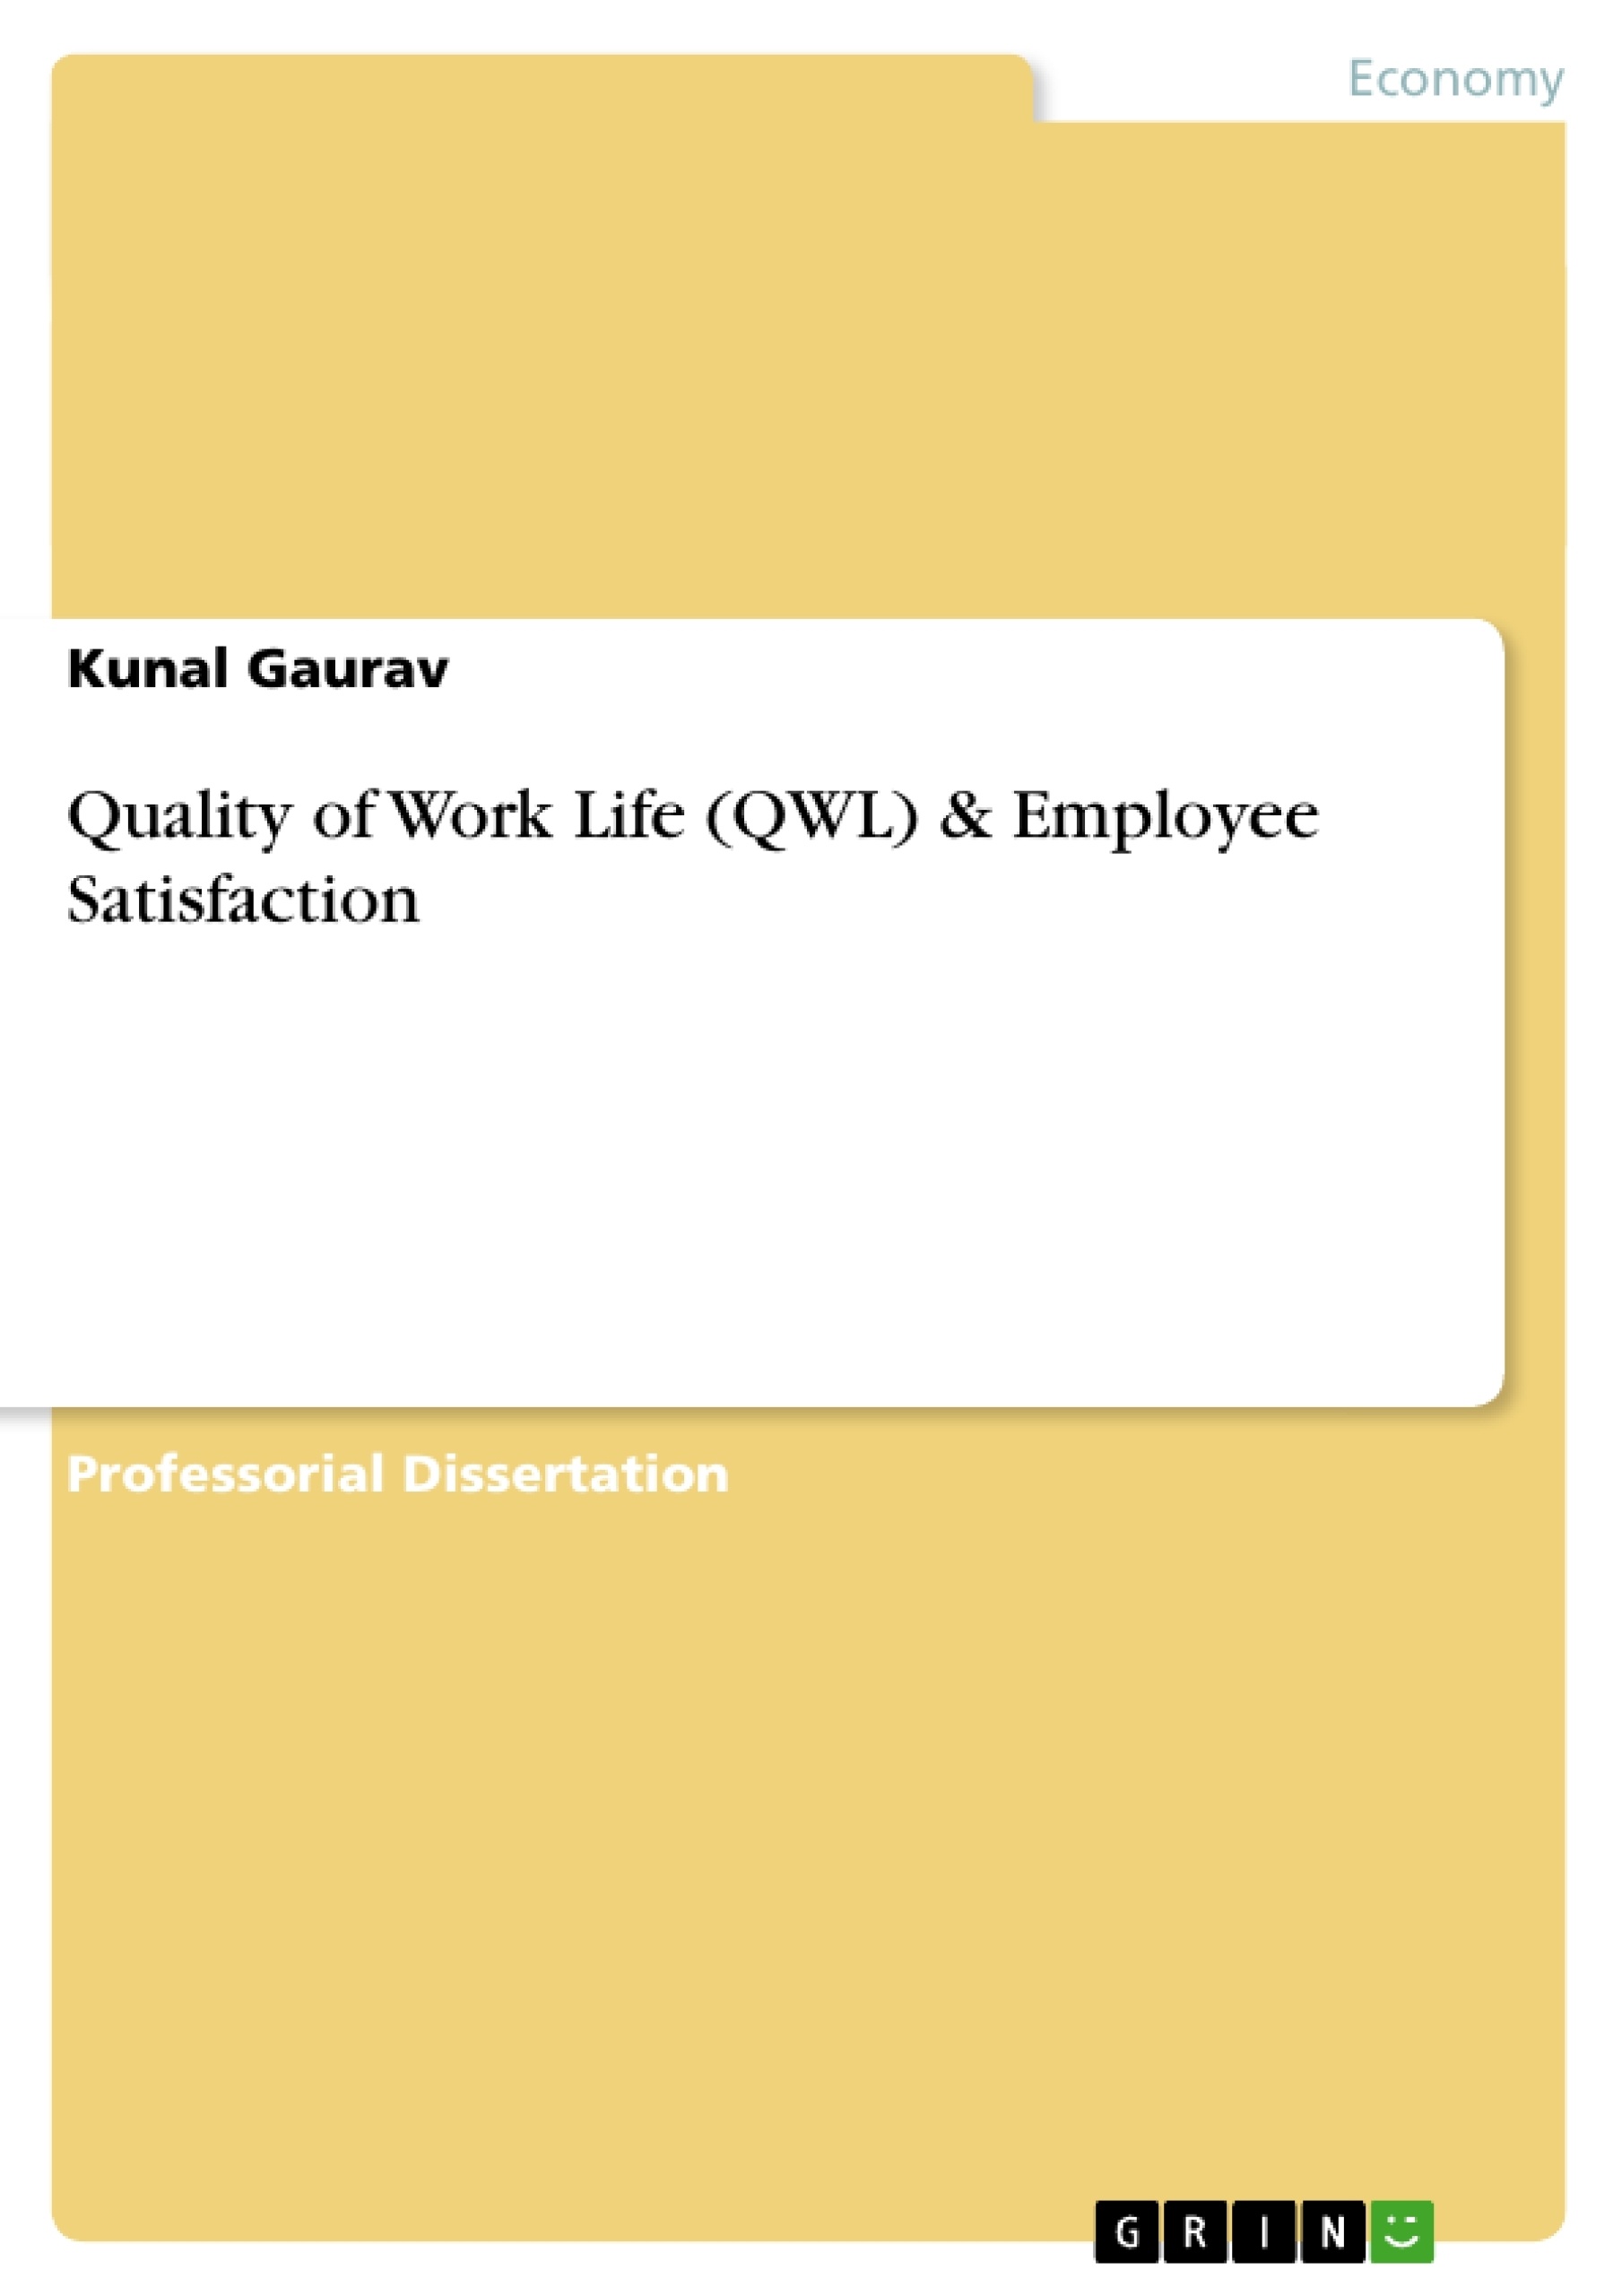 Business research paper on employee satisfaction